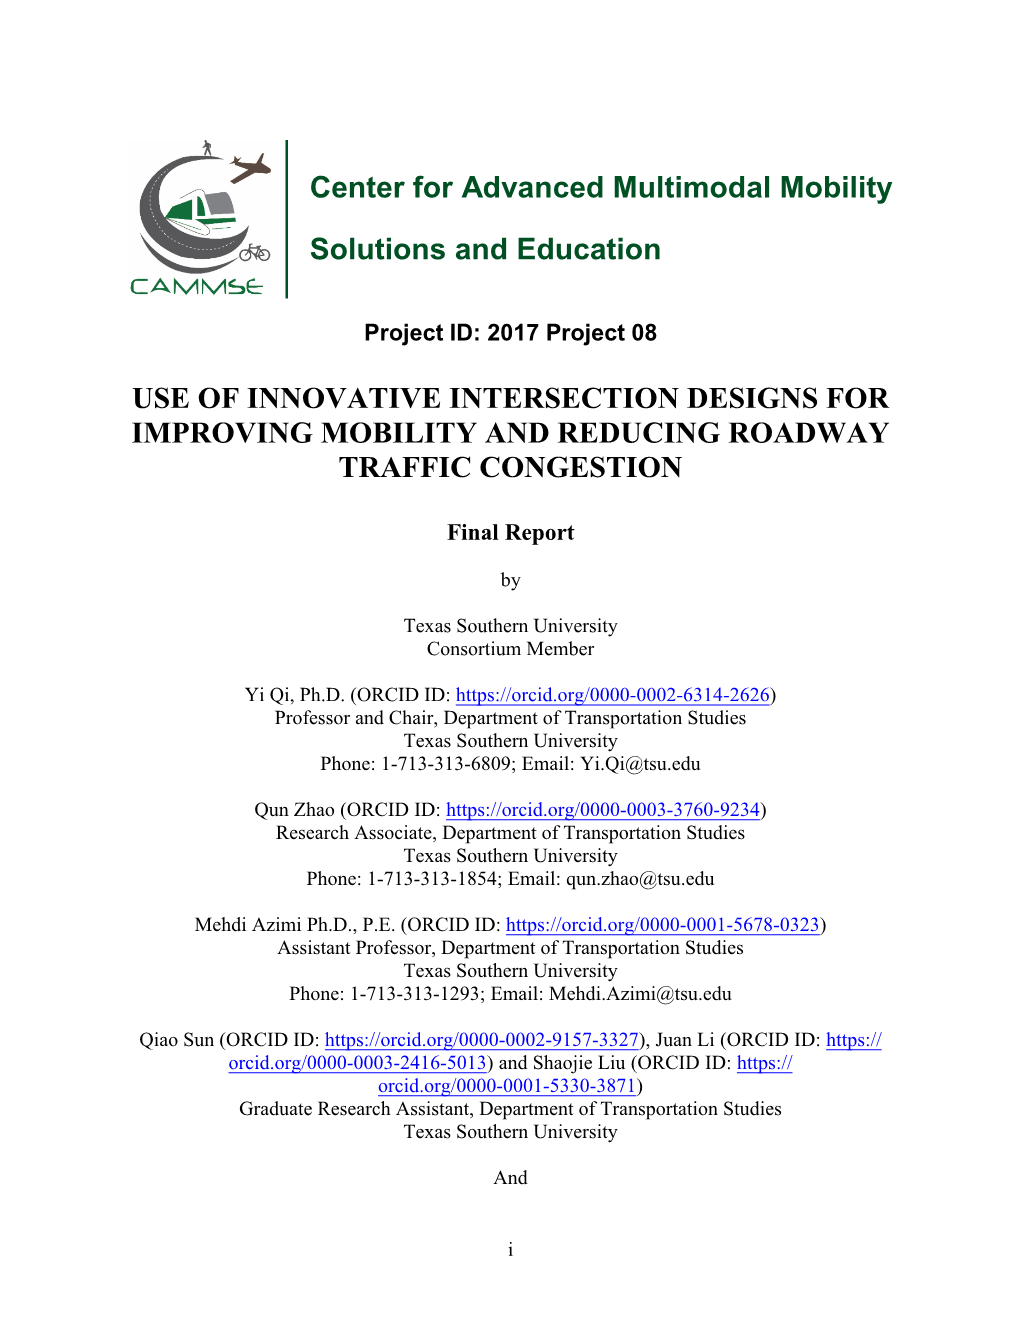 Use of Innovative Intersection Designs for Improving Mobility and Reducing Roadway Traffic Congestion